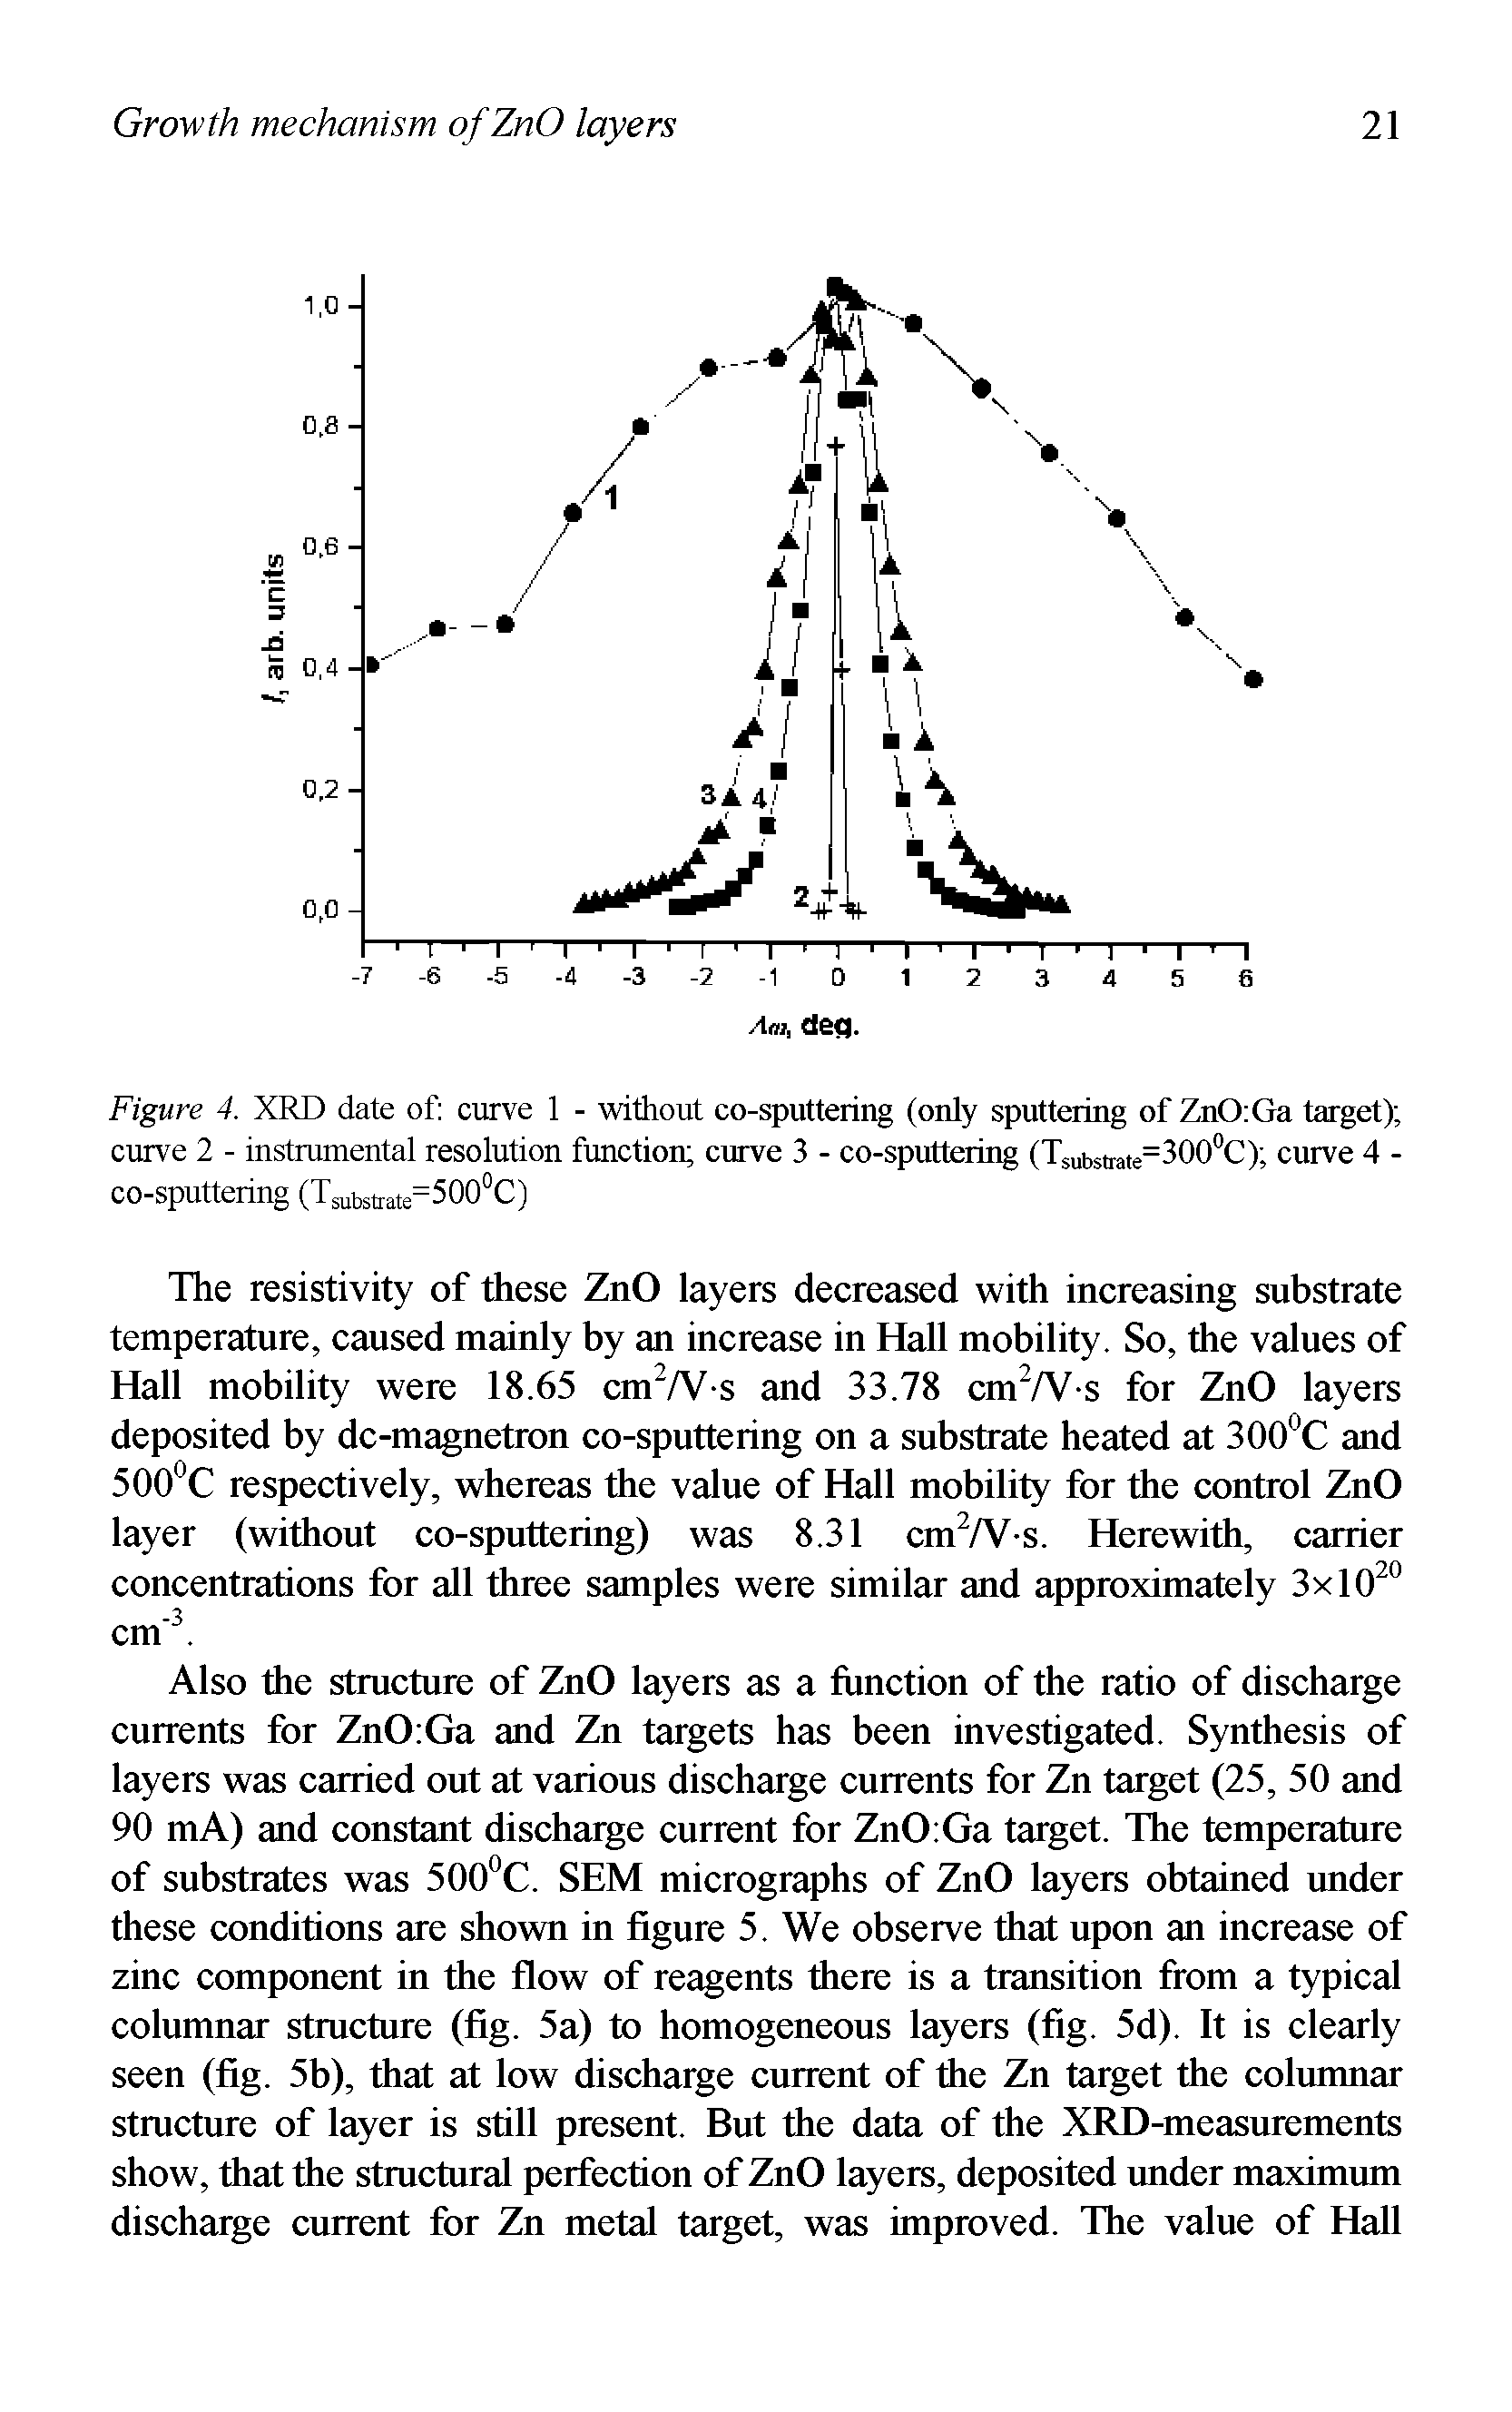 Figure 4. XRD date of curve 1 - without co-sputtering (only sputtering of ZnO Ga target) curve 2 - instrumental resolution function curve 3 - co-sputteiing (Tsubstrate=300°C) curve 4 -co-sputtering (Tsubstrate=500 C)...